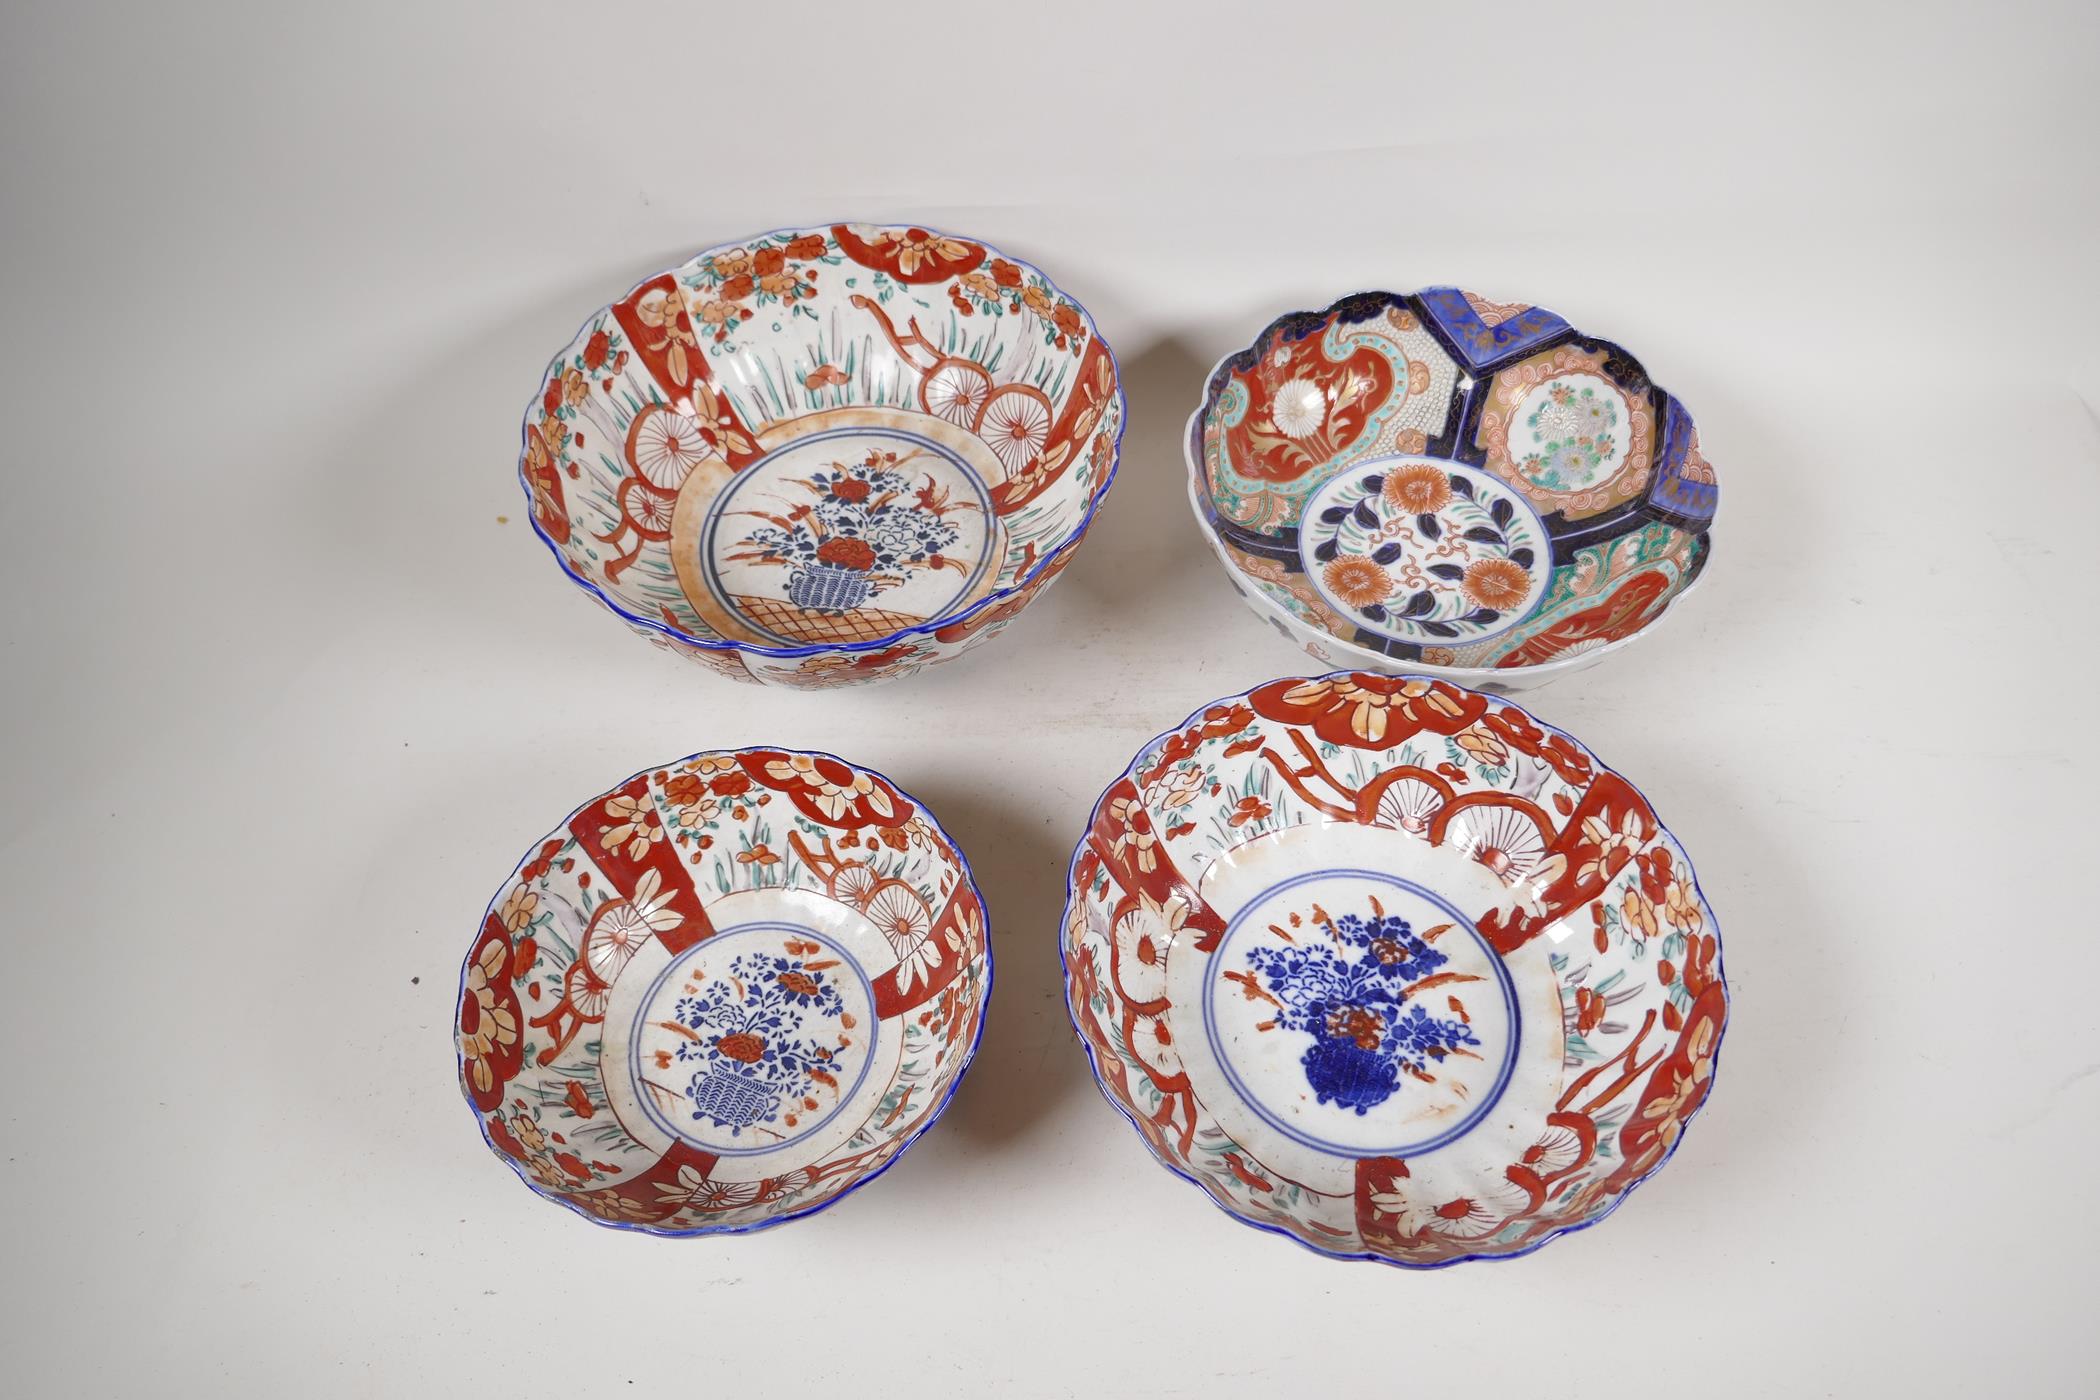 Four C19th Imari porcelain bowls decorated with traditional patterns, largest 10" diameter